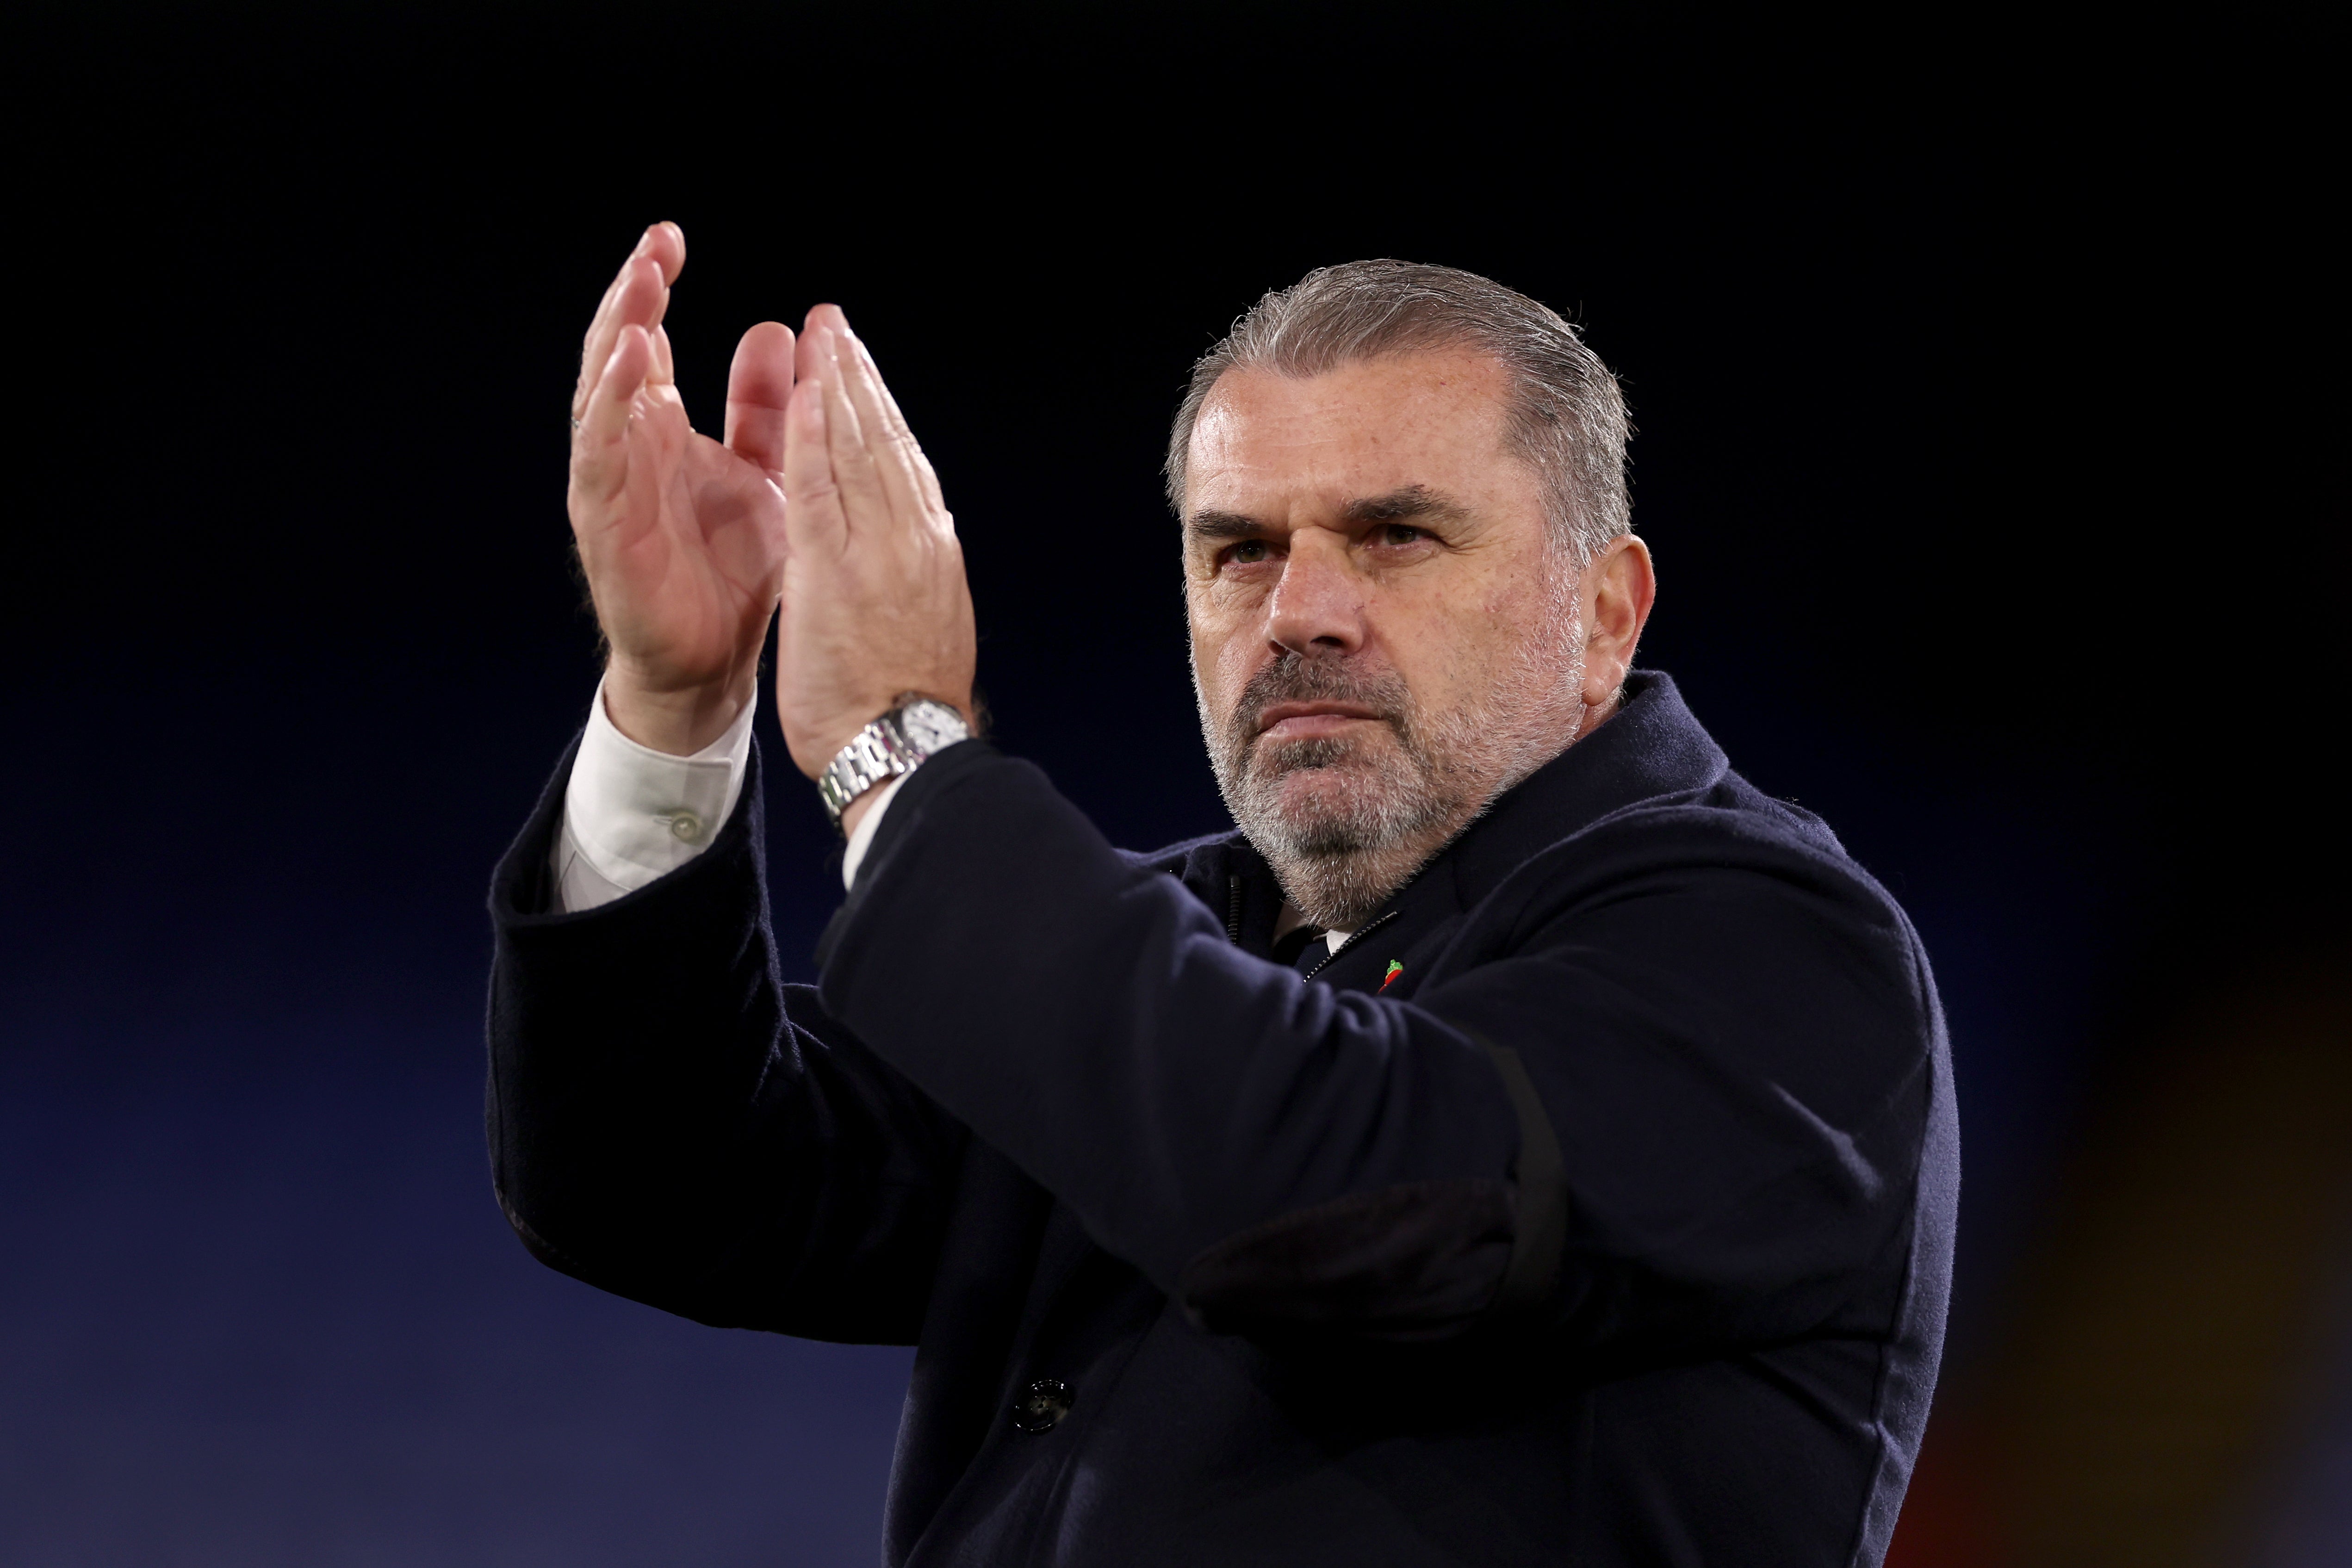 Postecoglou has taken 26 points from his first 10 Premier League games in charge